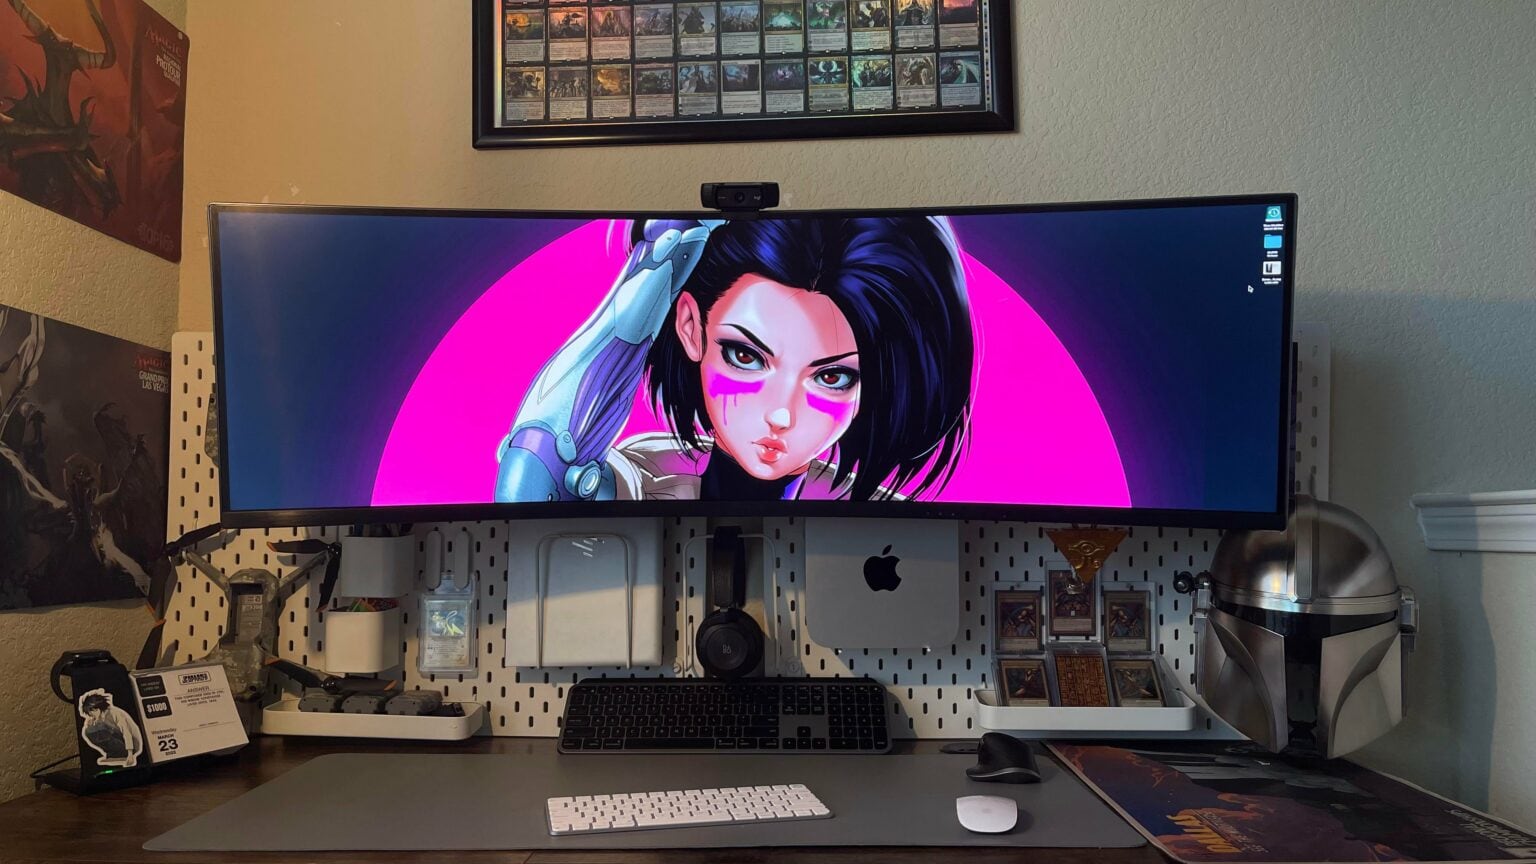 This Mac Studio setup's owner said they had to go out and buy a Magic Keyboard and Magic Mouse because they couldn't pair their Logitech input devices.